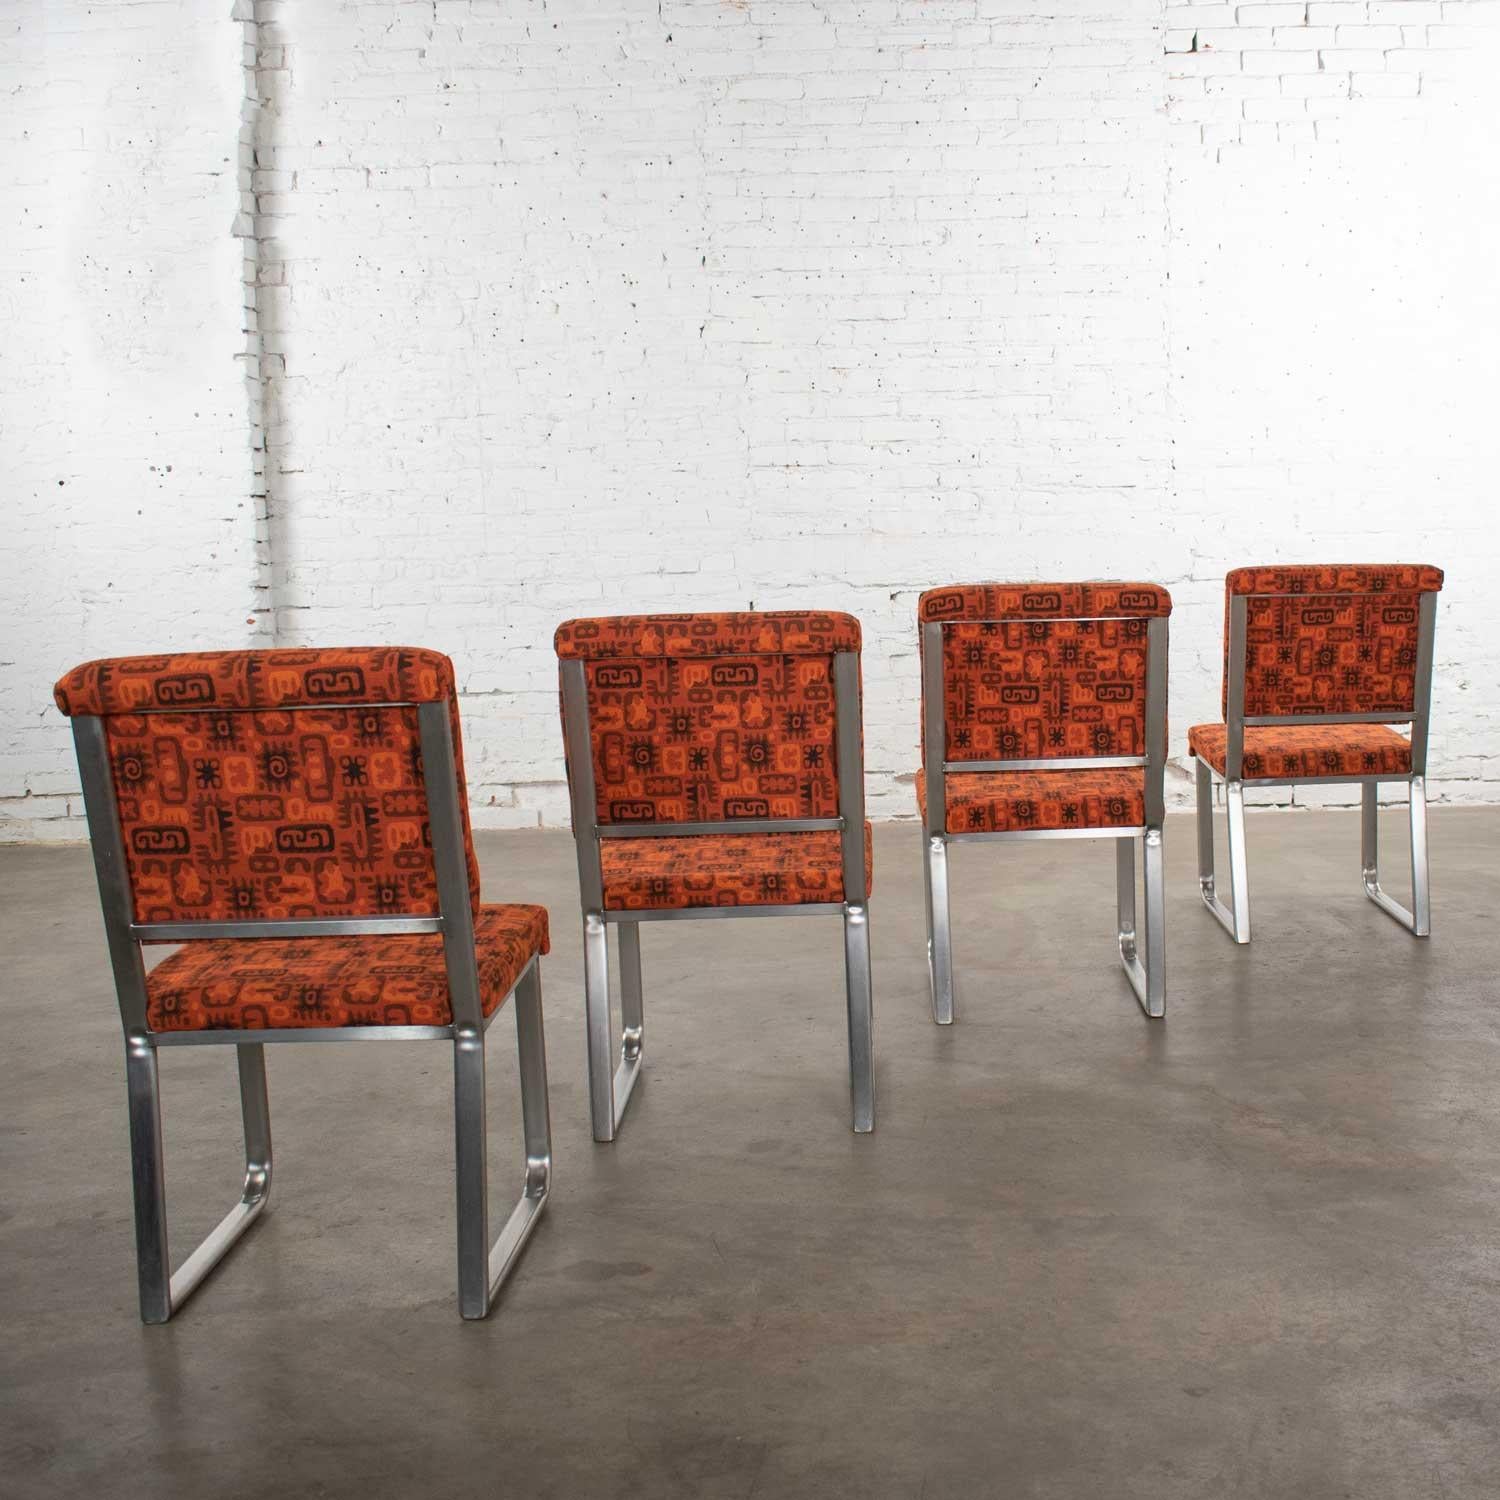 4 Streamline Modern Railroad Dining Car Chairs Stainless Steel and Orange Fabric For Sale 3